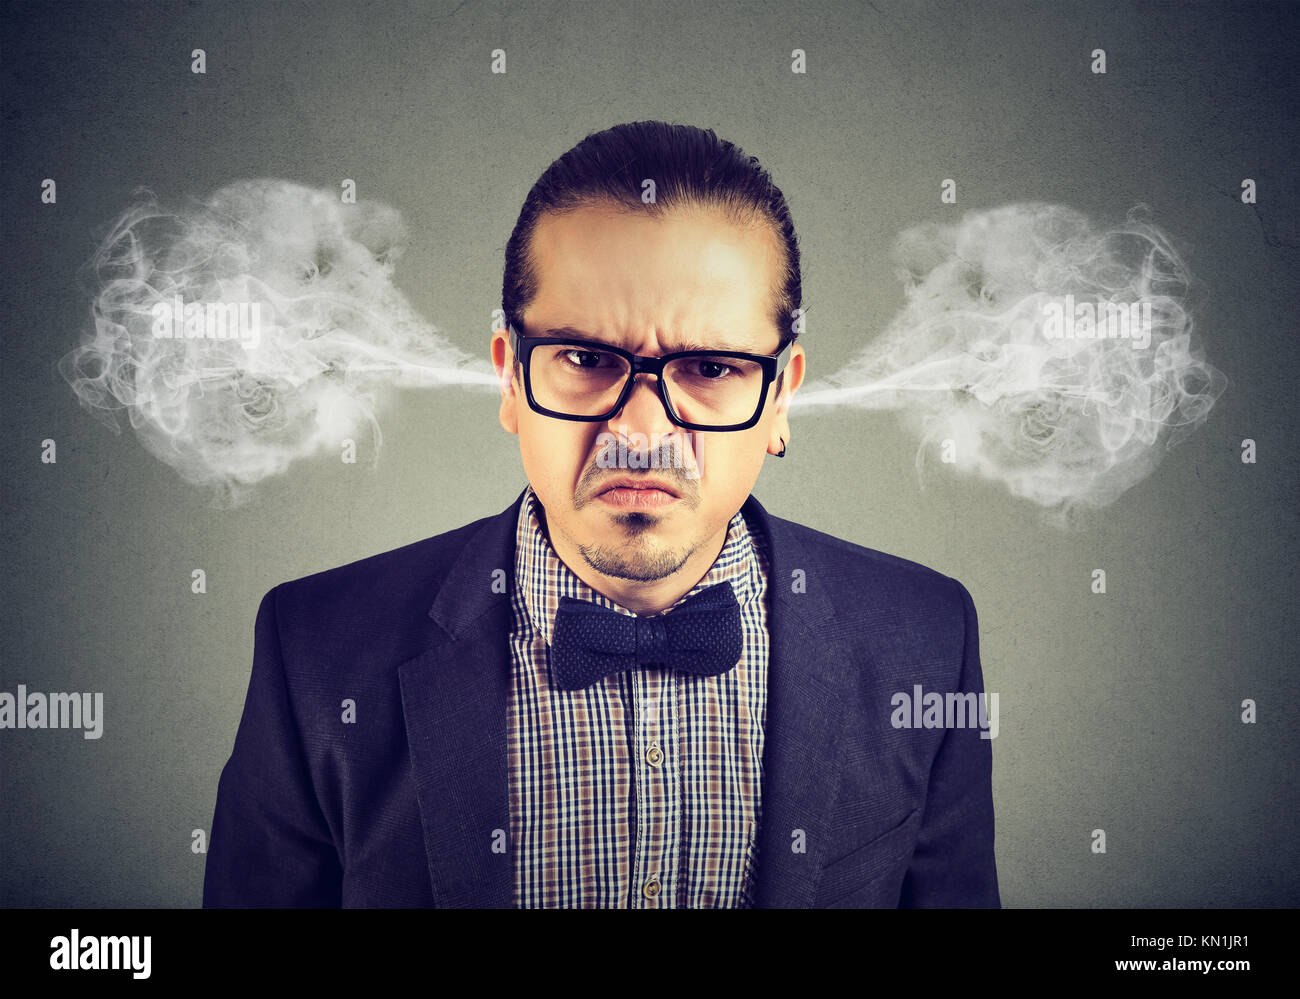 Angry business man, blowing steam coming out of ears, about to have nervous breakdown isolated on gray background. Negative emotions facial expression Stock Photo